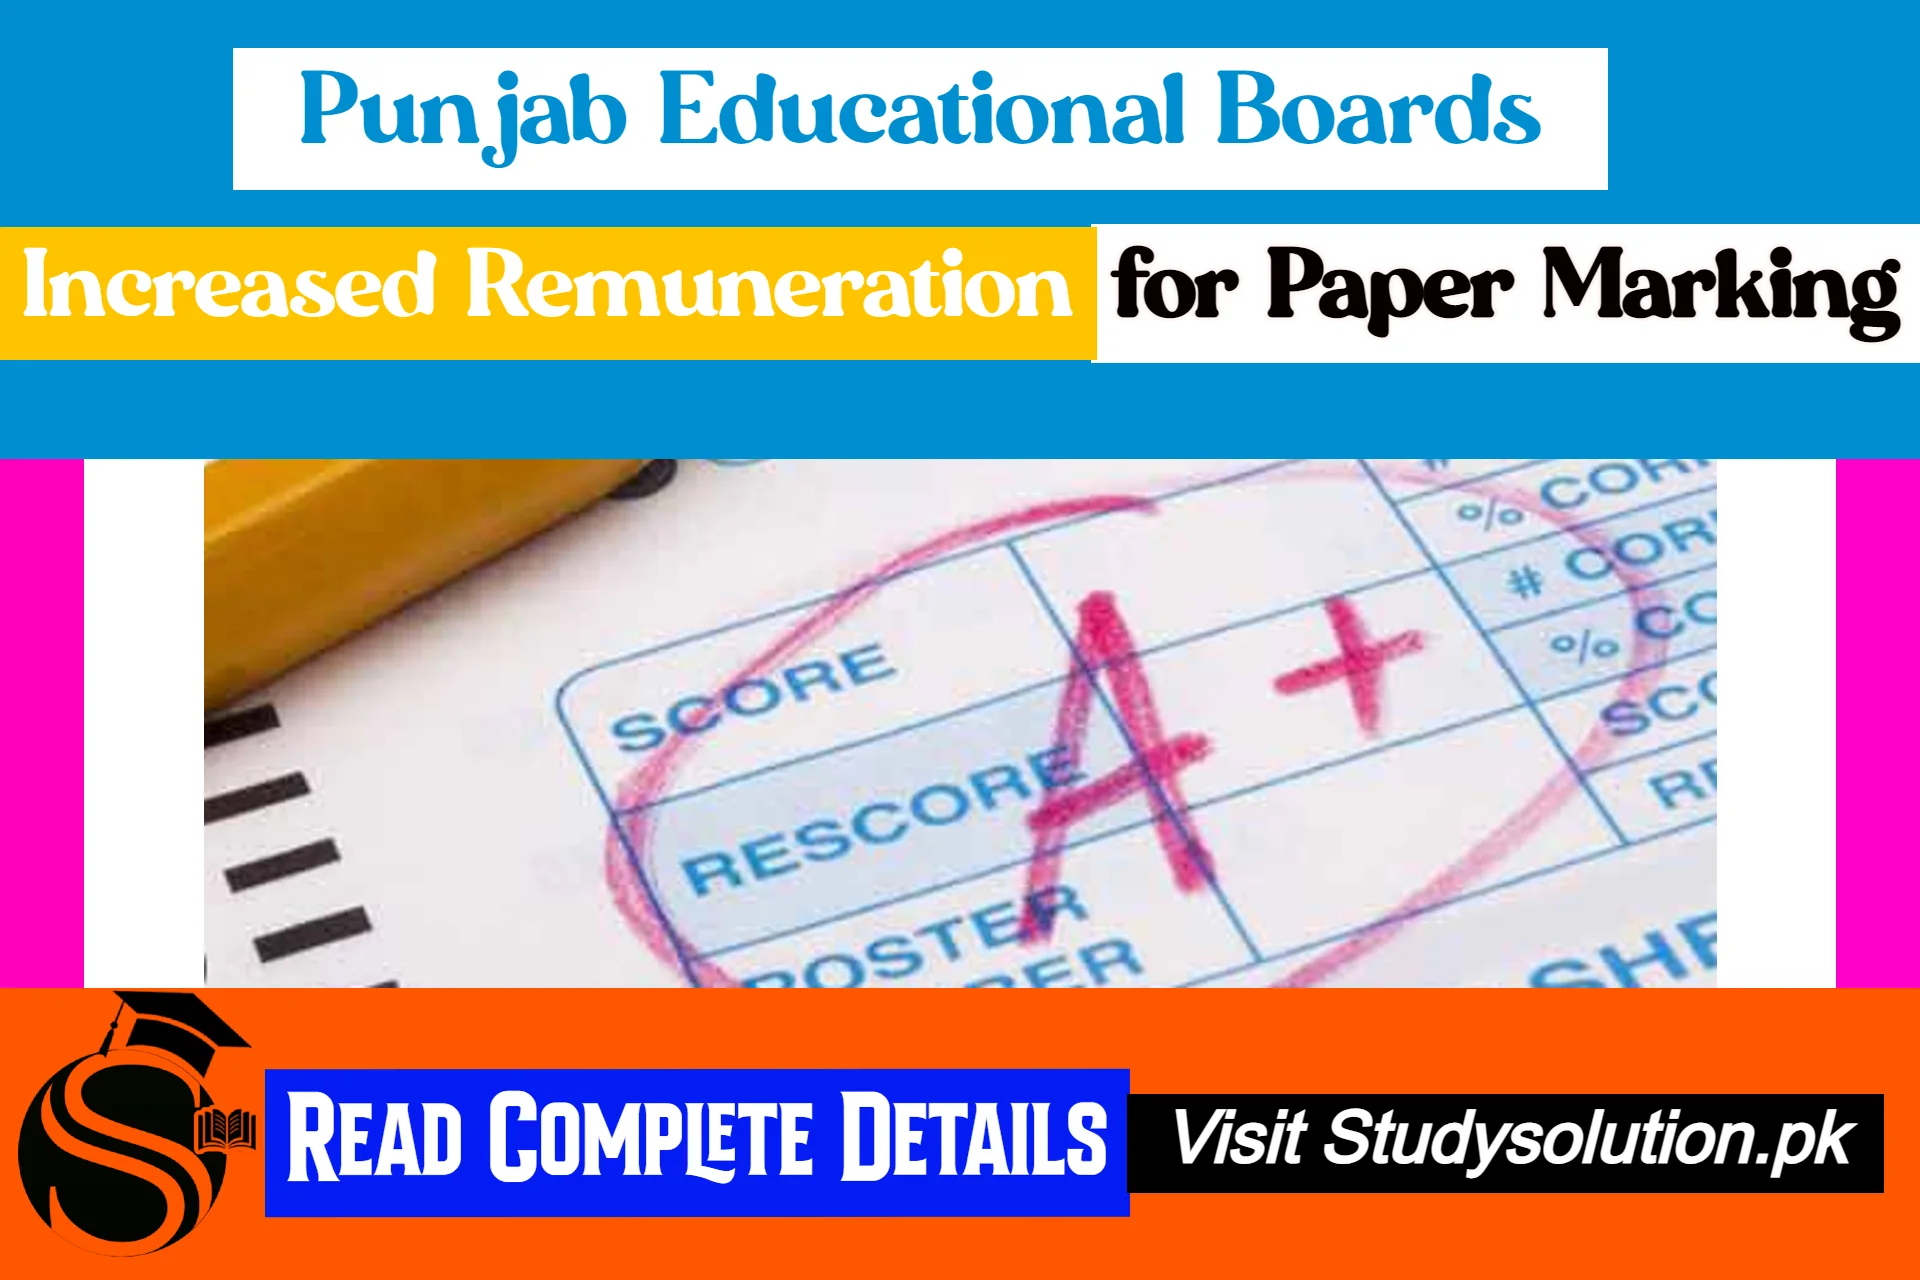 Punjab Educational Boards Increased Remuneration for Paper Marking - Latest Update